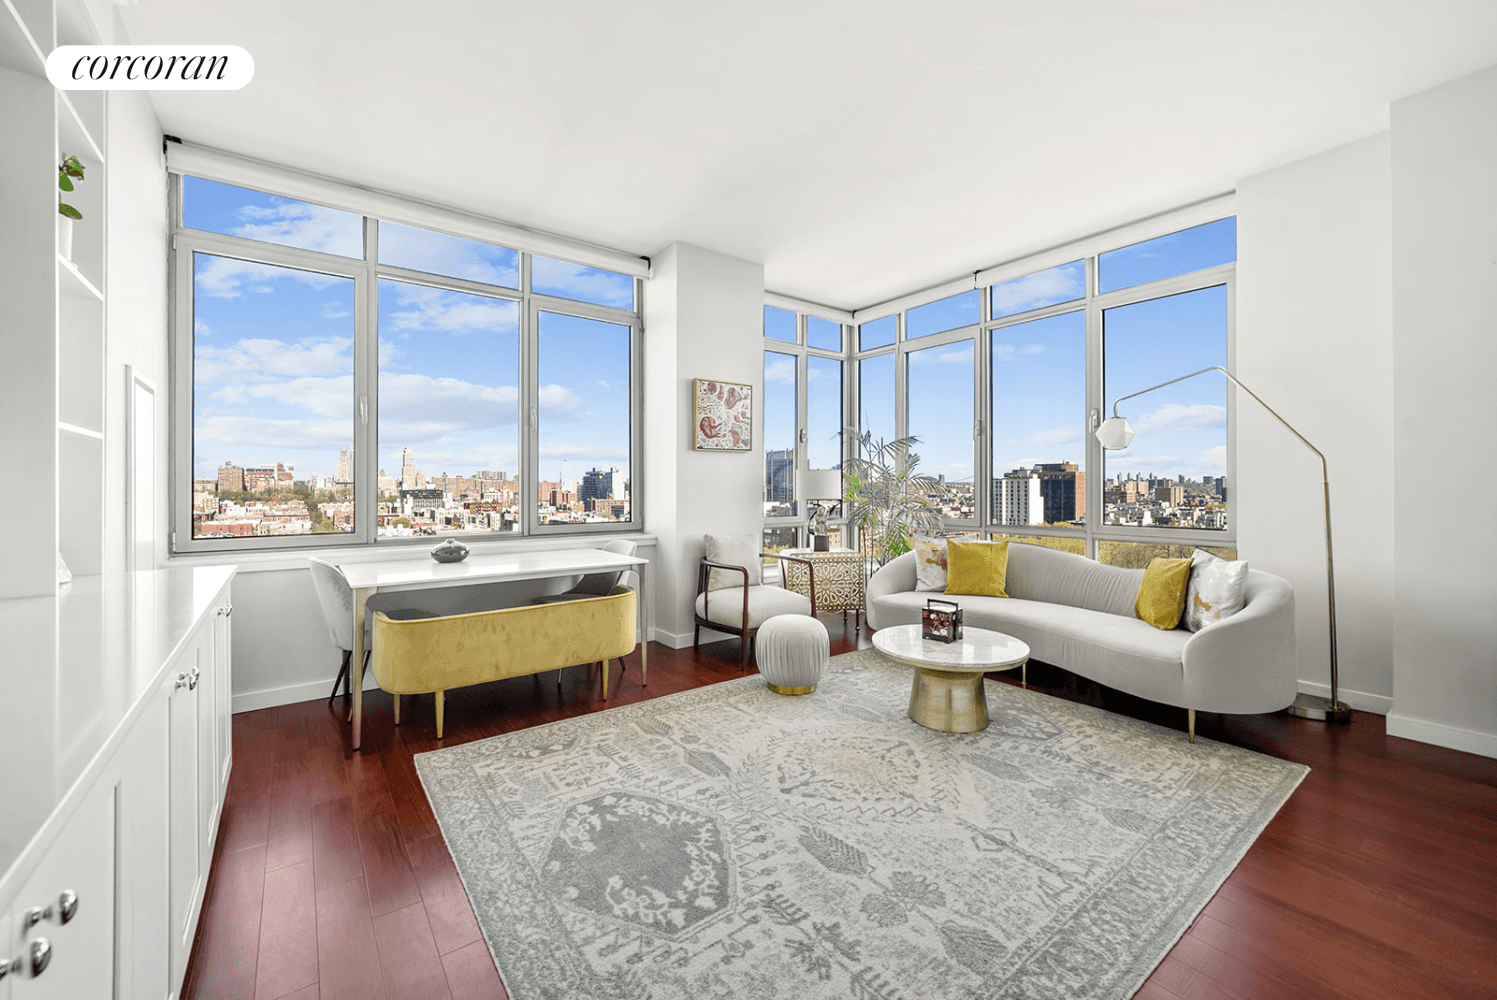 Welcome to your slice of urban paradise located in the heart of Harlem at 1485 Fifth Avenue.